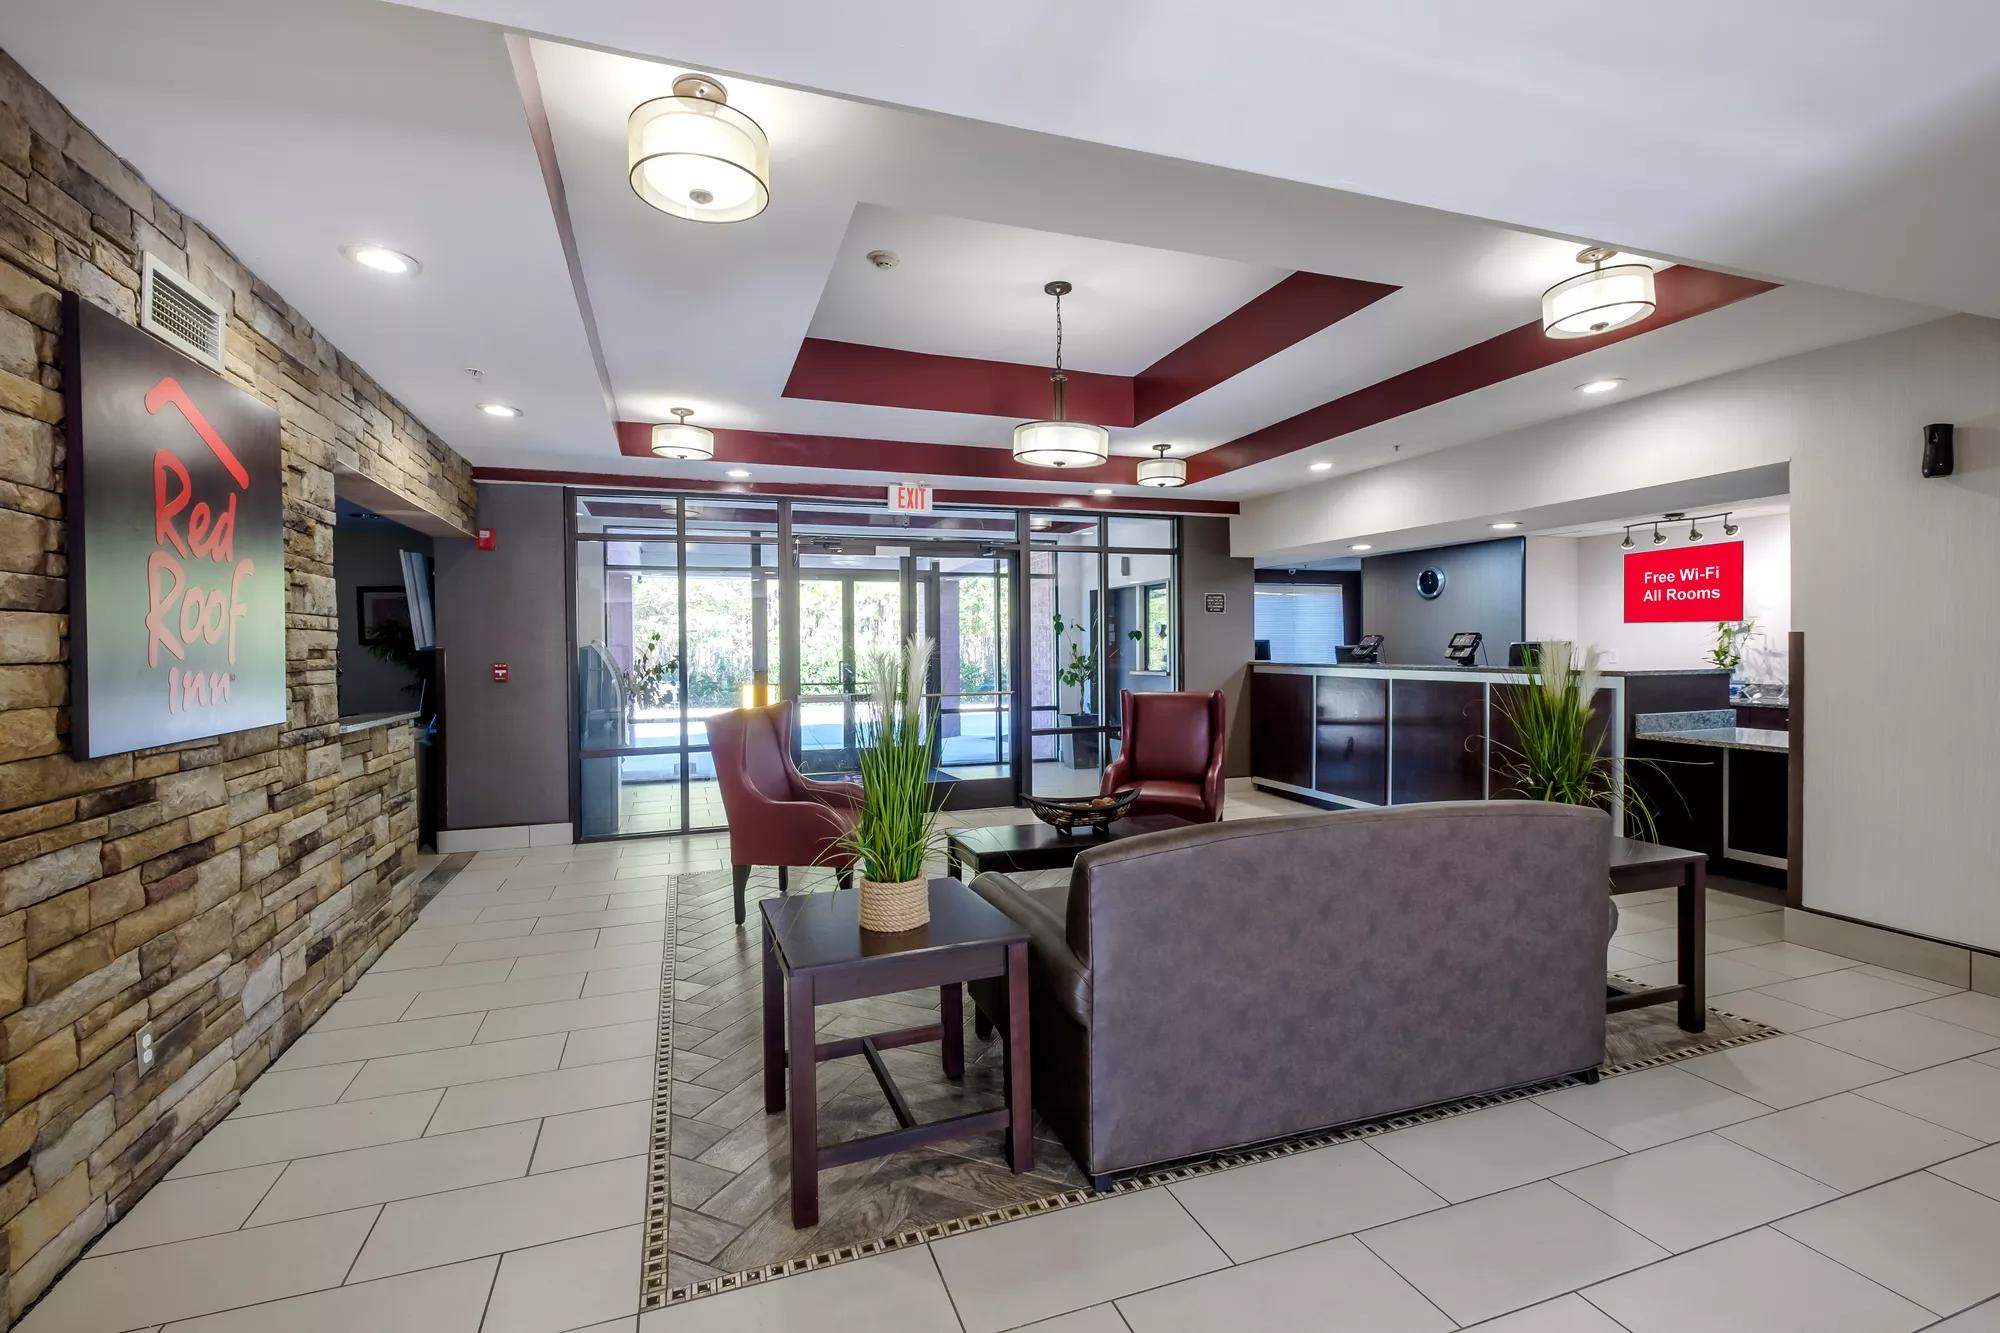 Red Roof Inn & Suites Savannah Airport Front Desk and Lobby Sitting Area